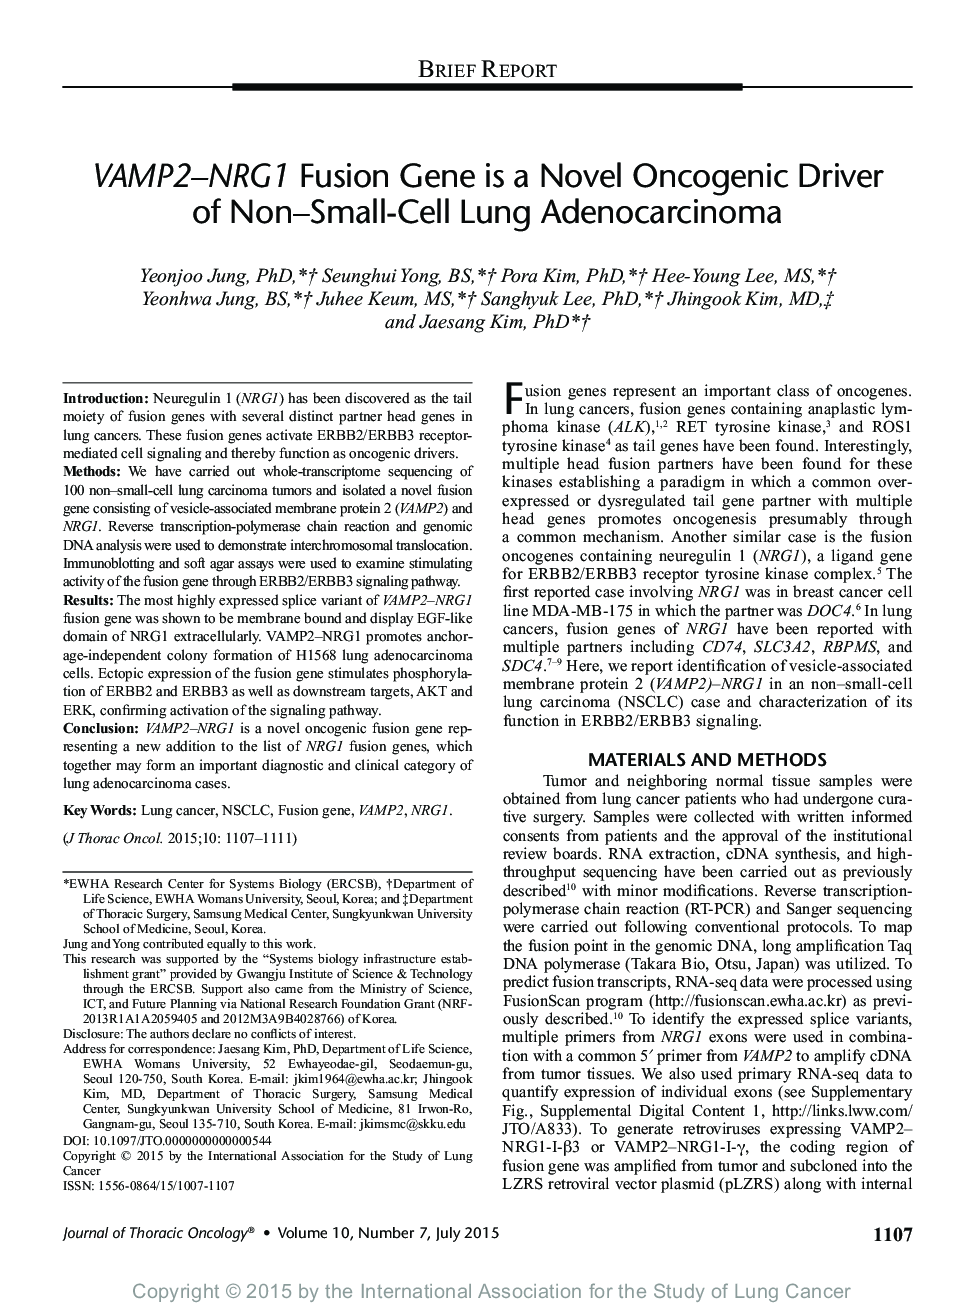 VAMP2-NRG1 Fusion Gene is a Novel Oncogenic Driver of Non-Small-Cell Lung Adenocarcinoma